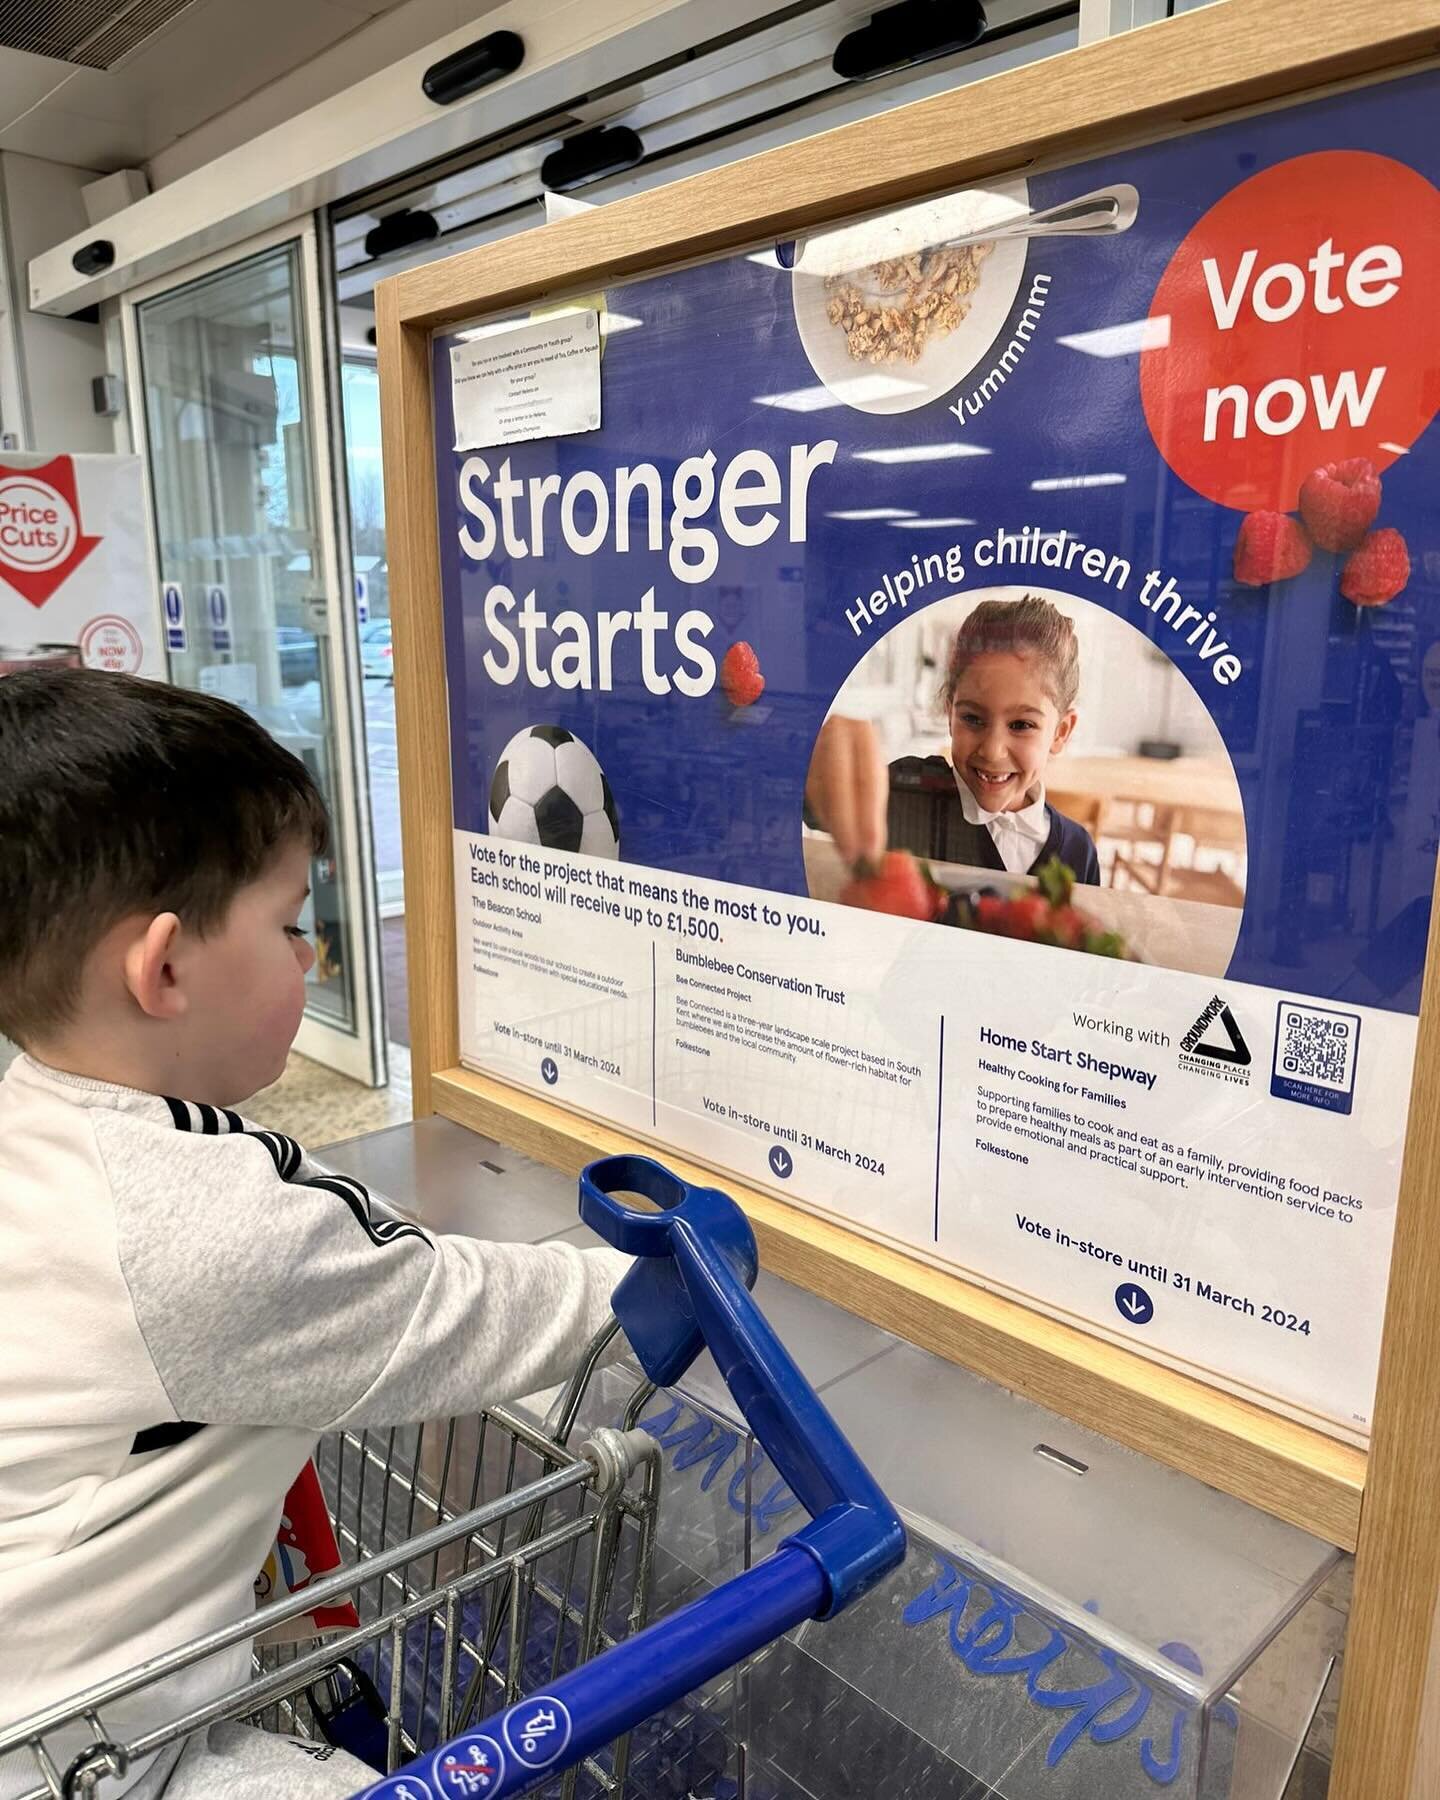 After your Tesco shop, why not take a moment to slot some blue tokens or better still, get your little one to do it&hellip;..like Joe did ☺️
..
..
This simple act of kindness can help hugely 🤍 
..
..
Vote in-store until March 2024
..
..
@homestartsh